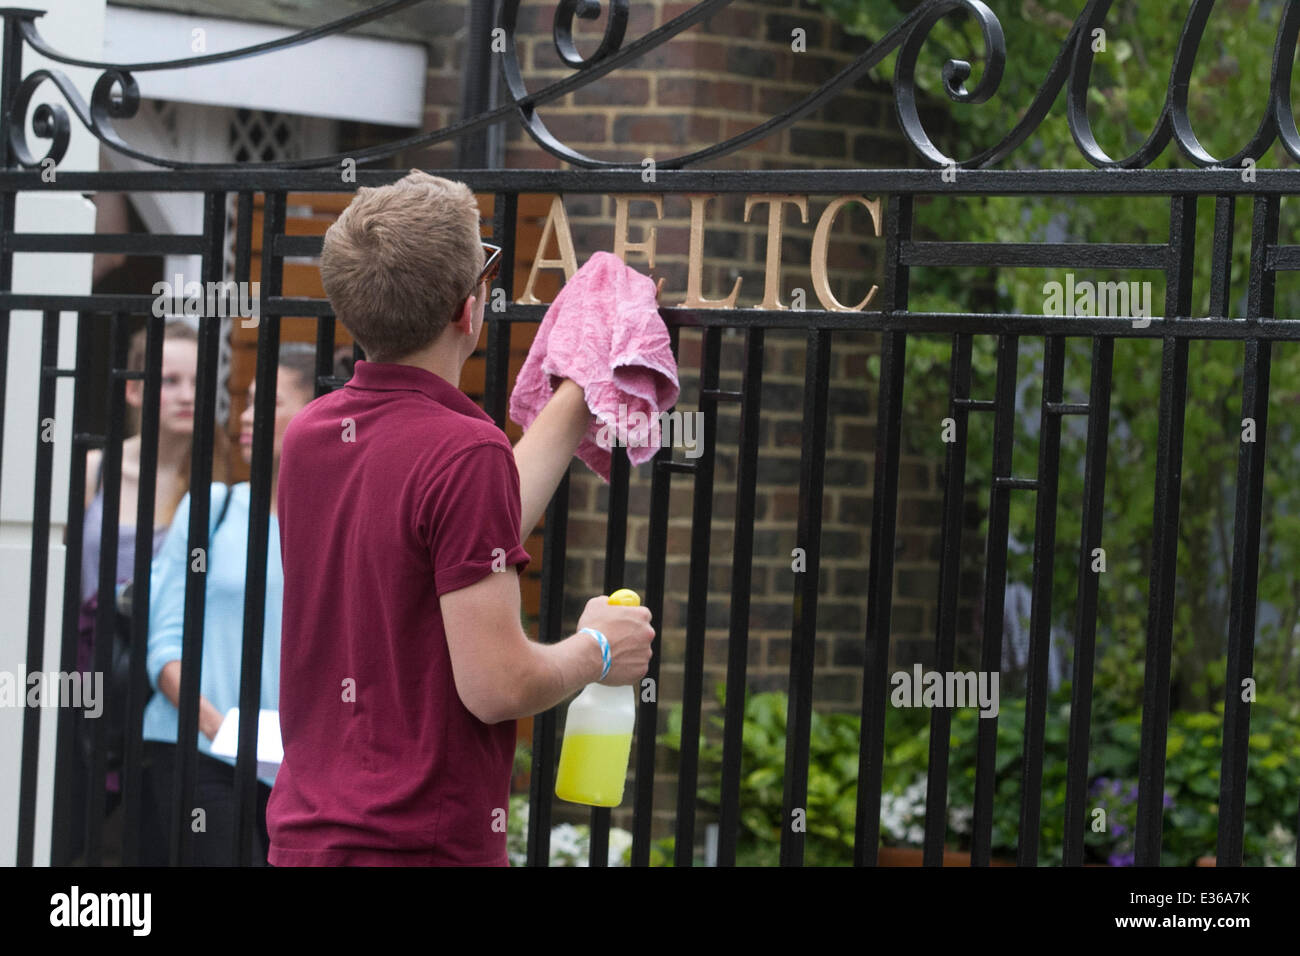 Wimbledon, London, UK. 22nd June, 2014. Staff members cleaning the entrance gate of the (AELTC ) All England Lawn Tennis Club ahead of the 2014 Wimbledon Lawn tennis championships which starts on Monday 23 June. Stock Photo